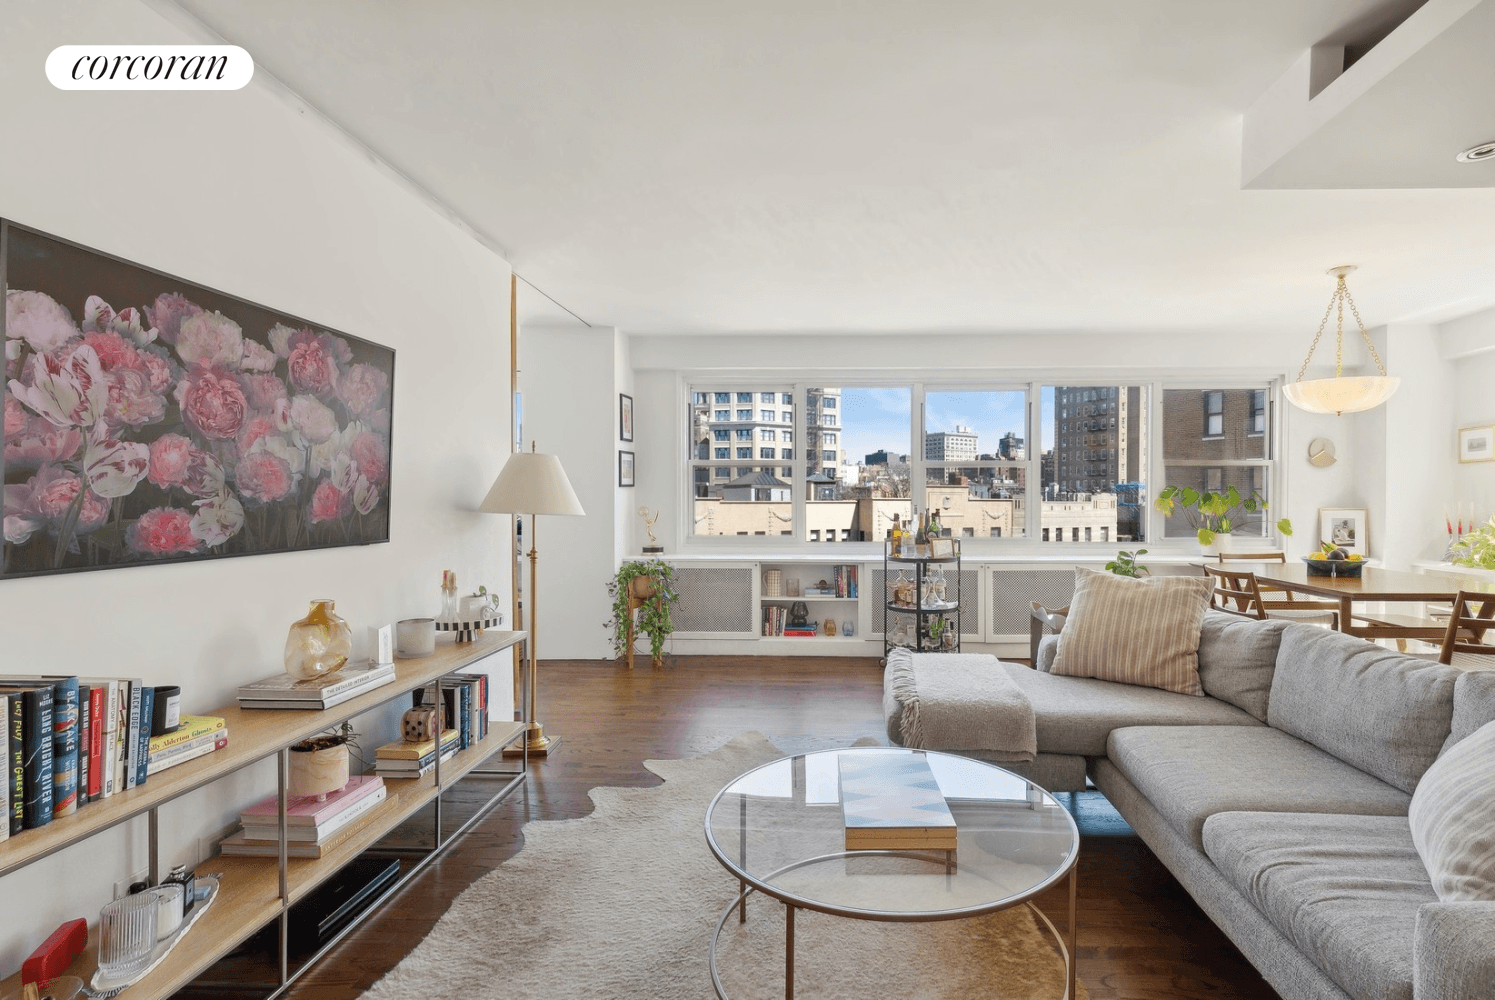 This triple mint apartment boasts breathtaking views of the city skyline and an abundance of natural sunlight that floods the space.